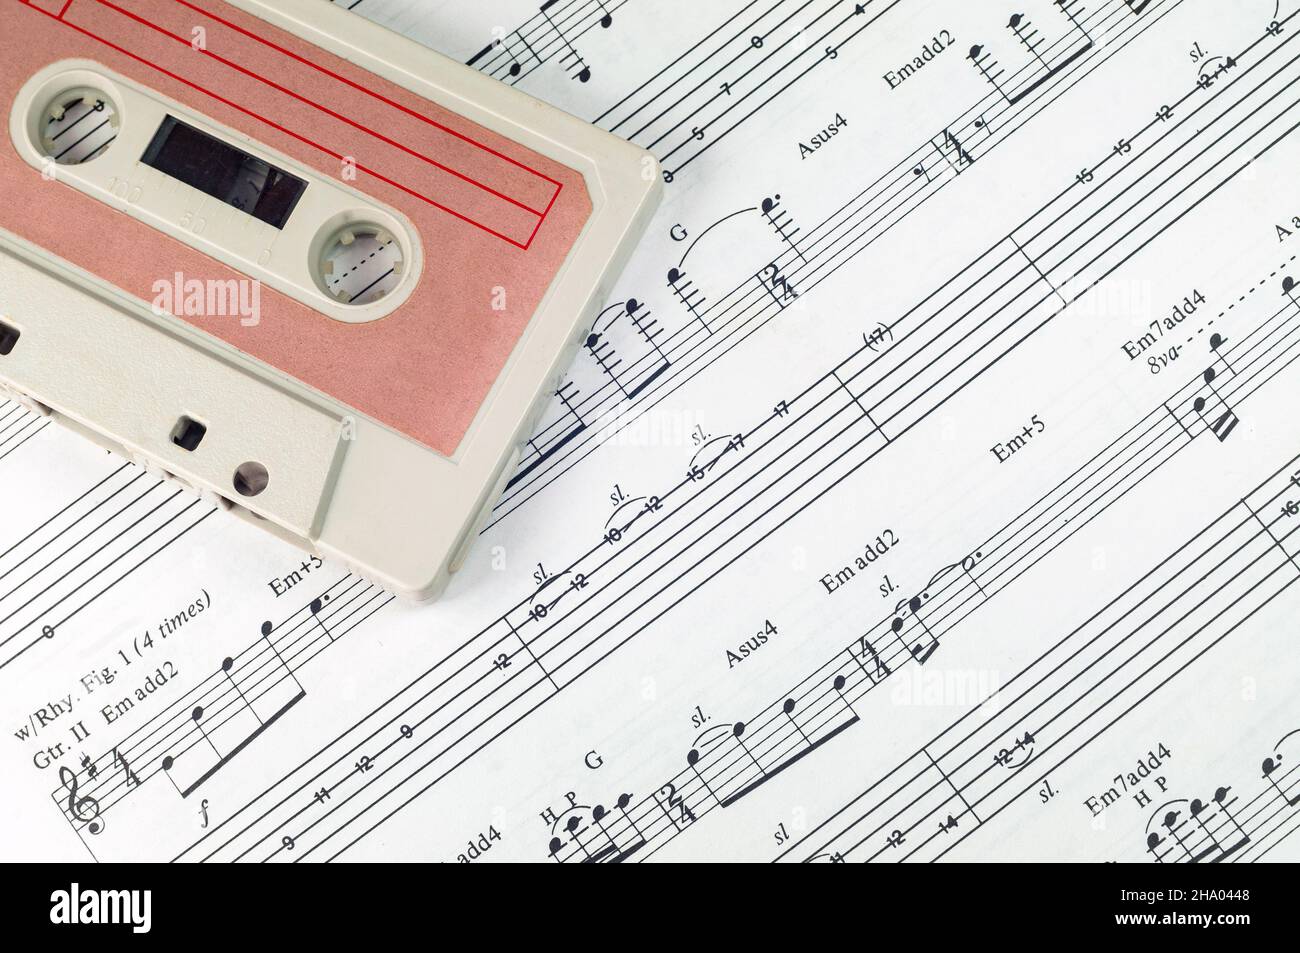 Close up photo of old cassette tape and music notes Stock Photo